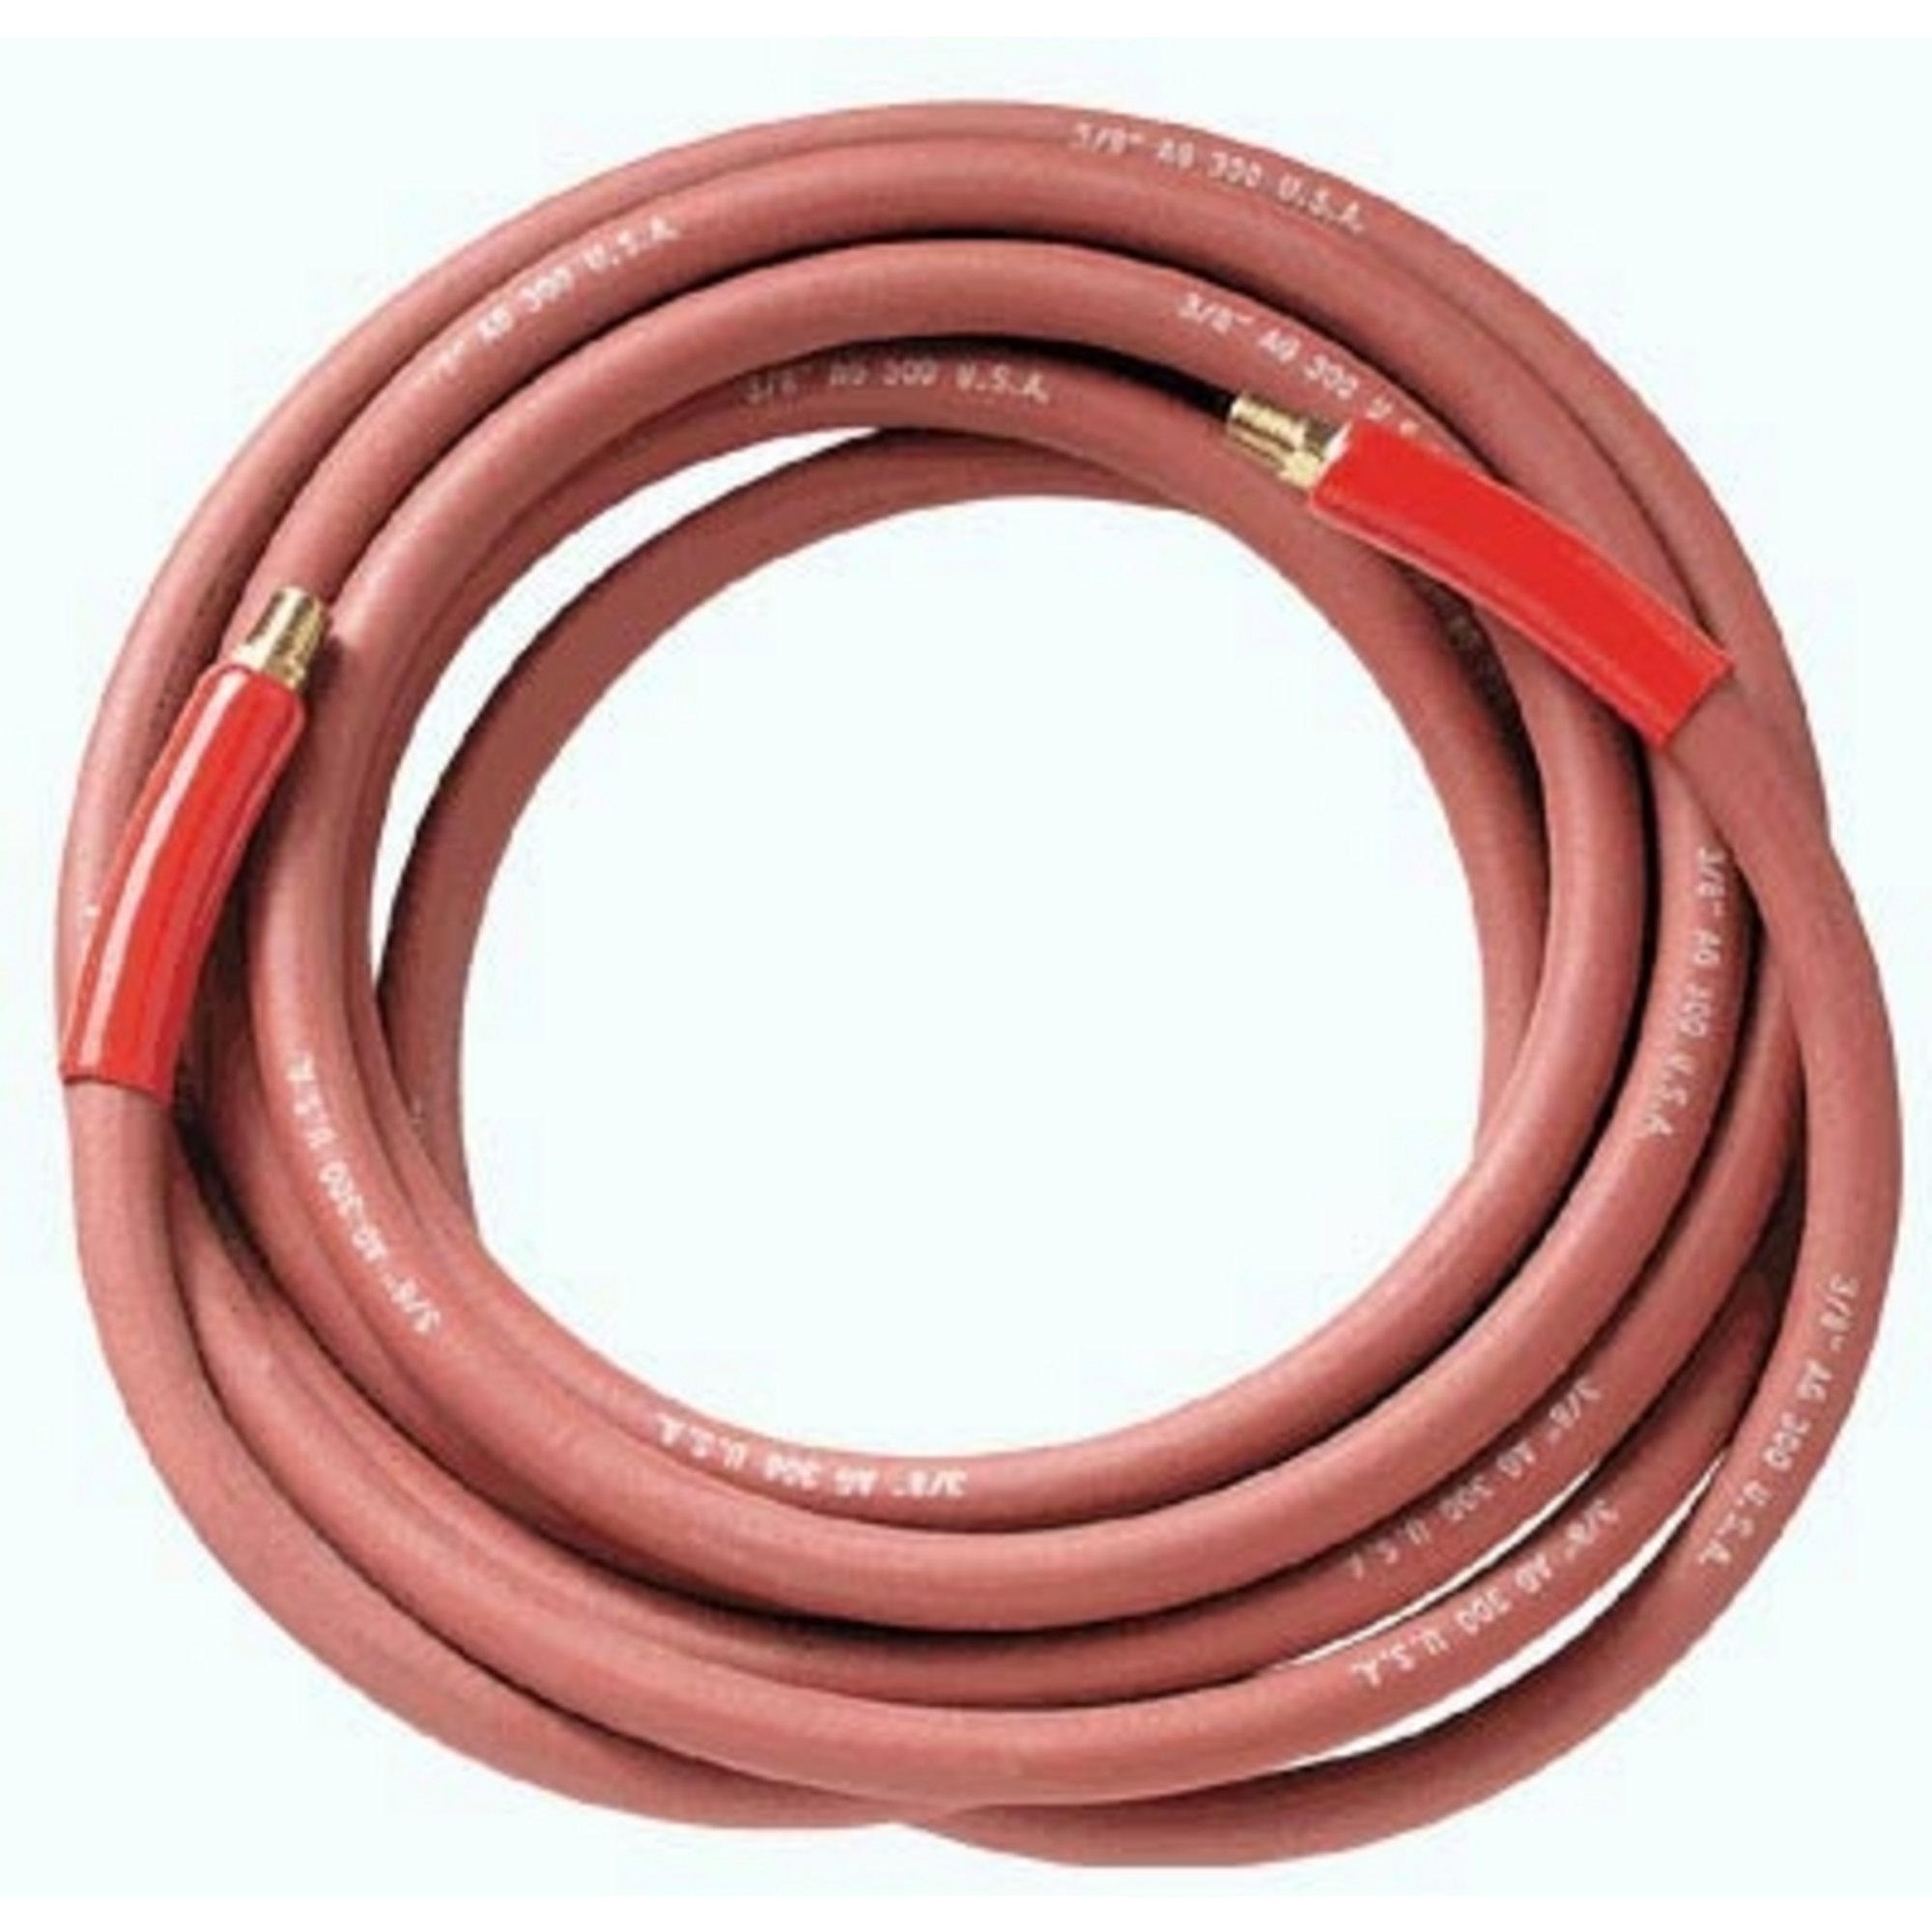 Apache Air Hose — 1/2in. x 50ft, Rubber